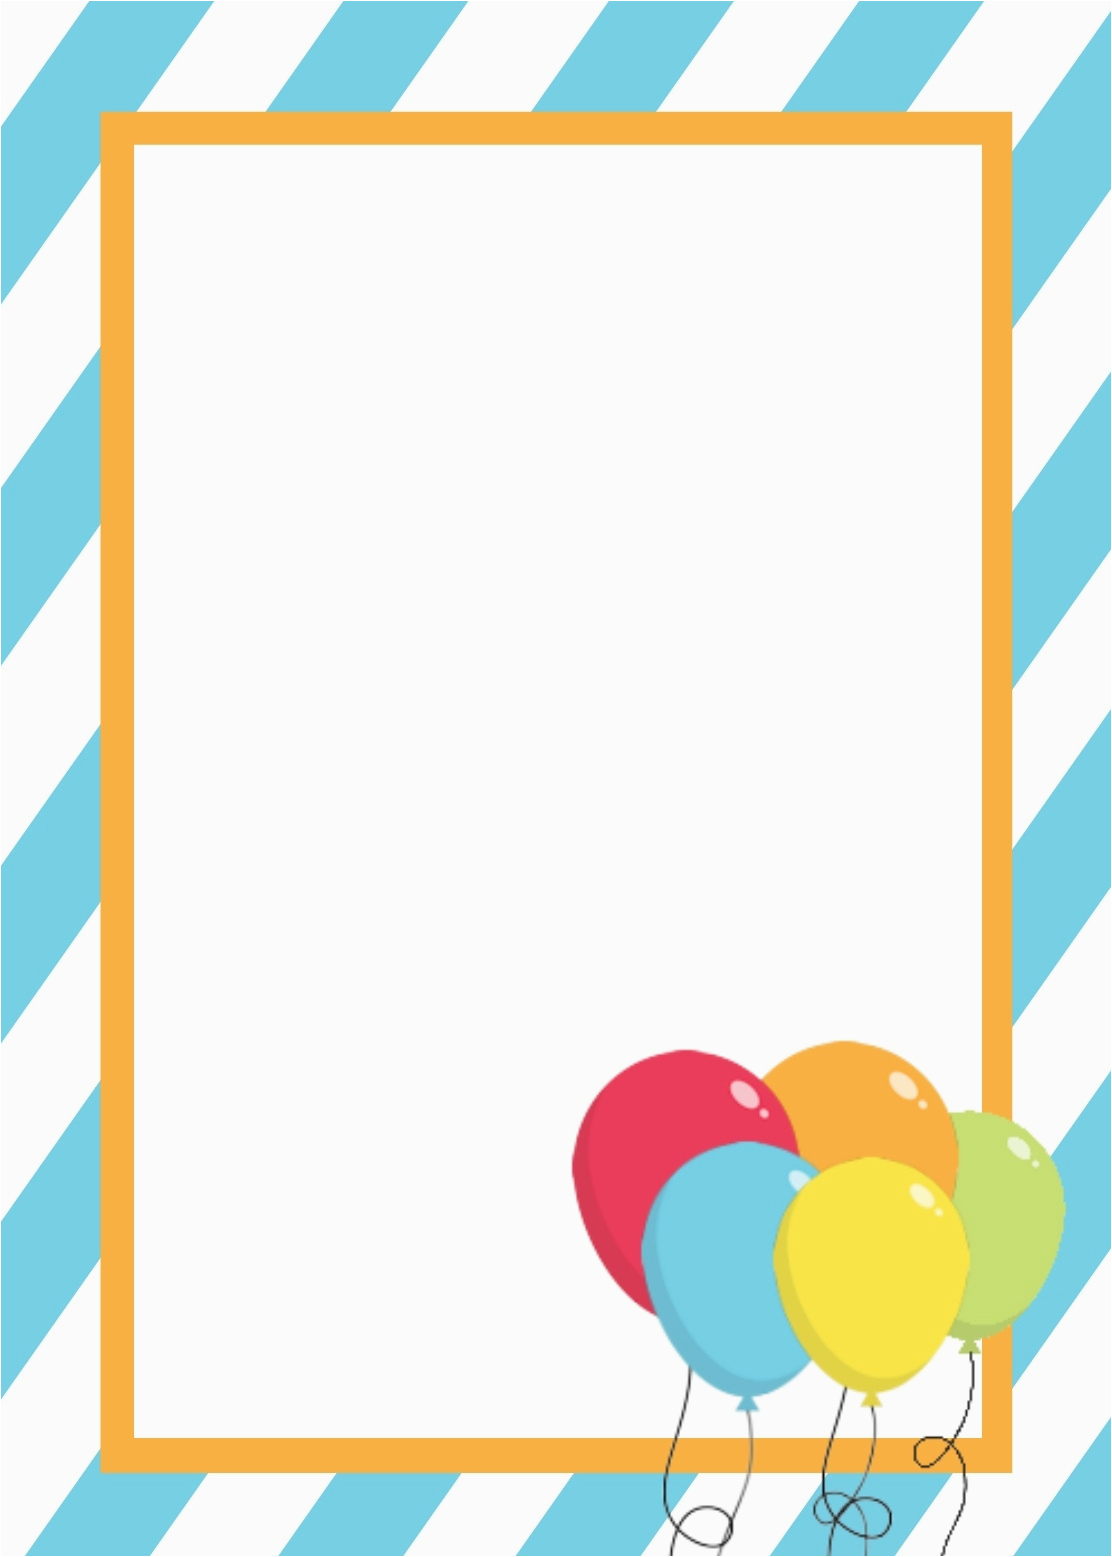 make your own birthday invitations free template